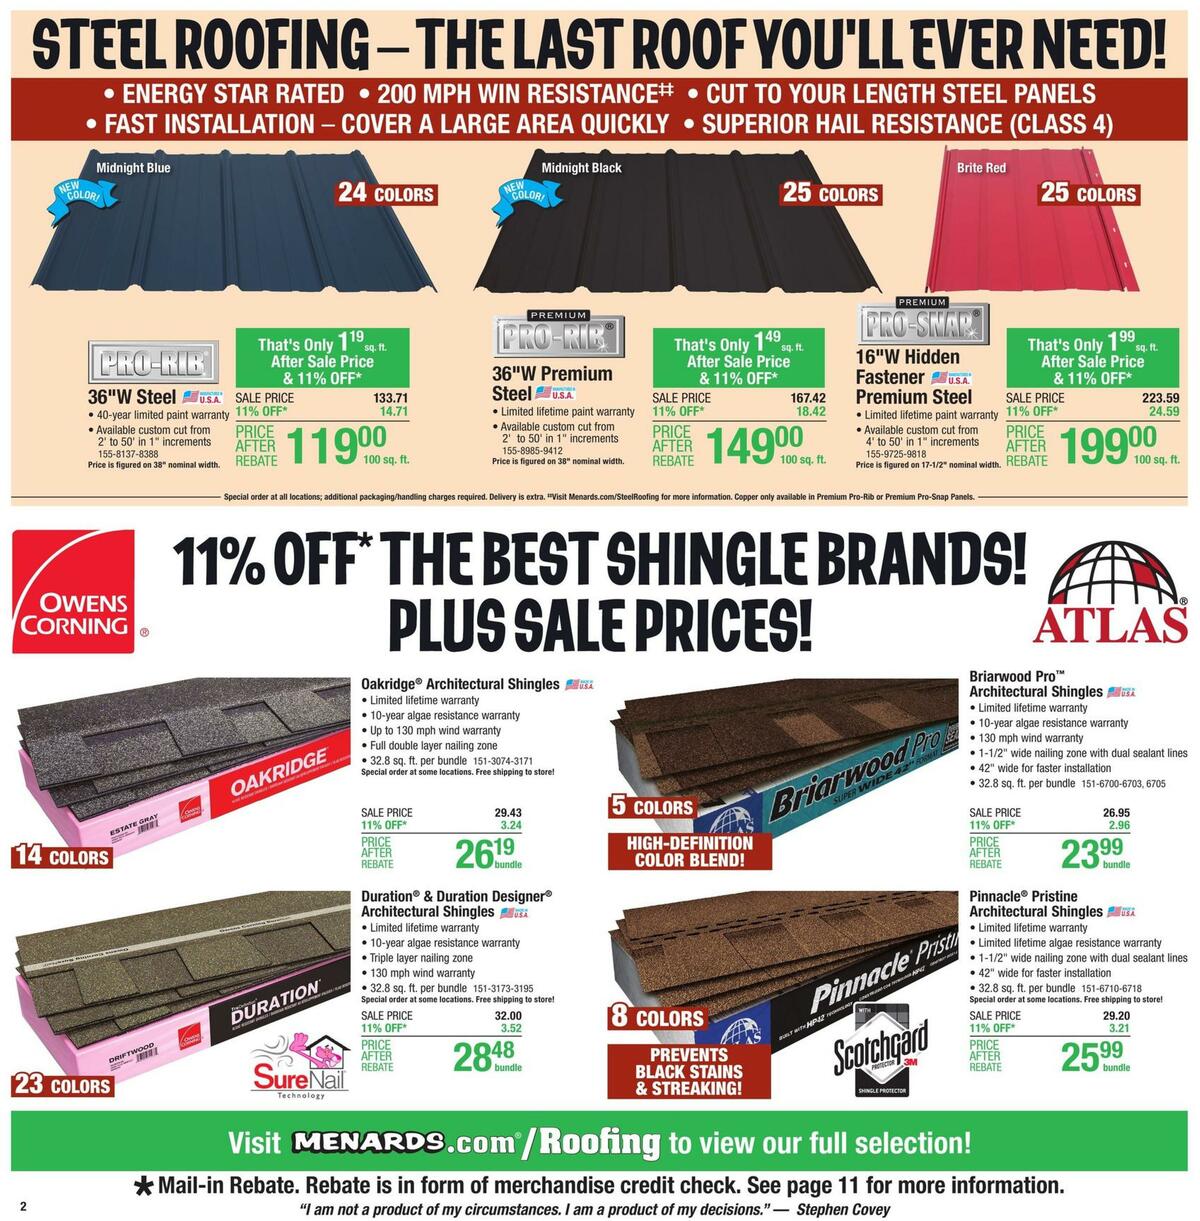 Menards Weekly Ad from October 14